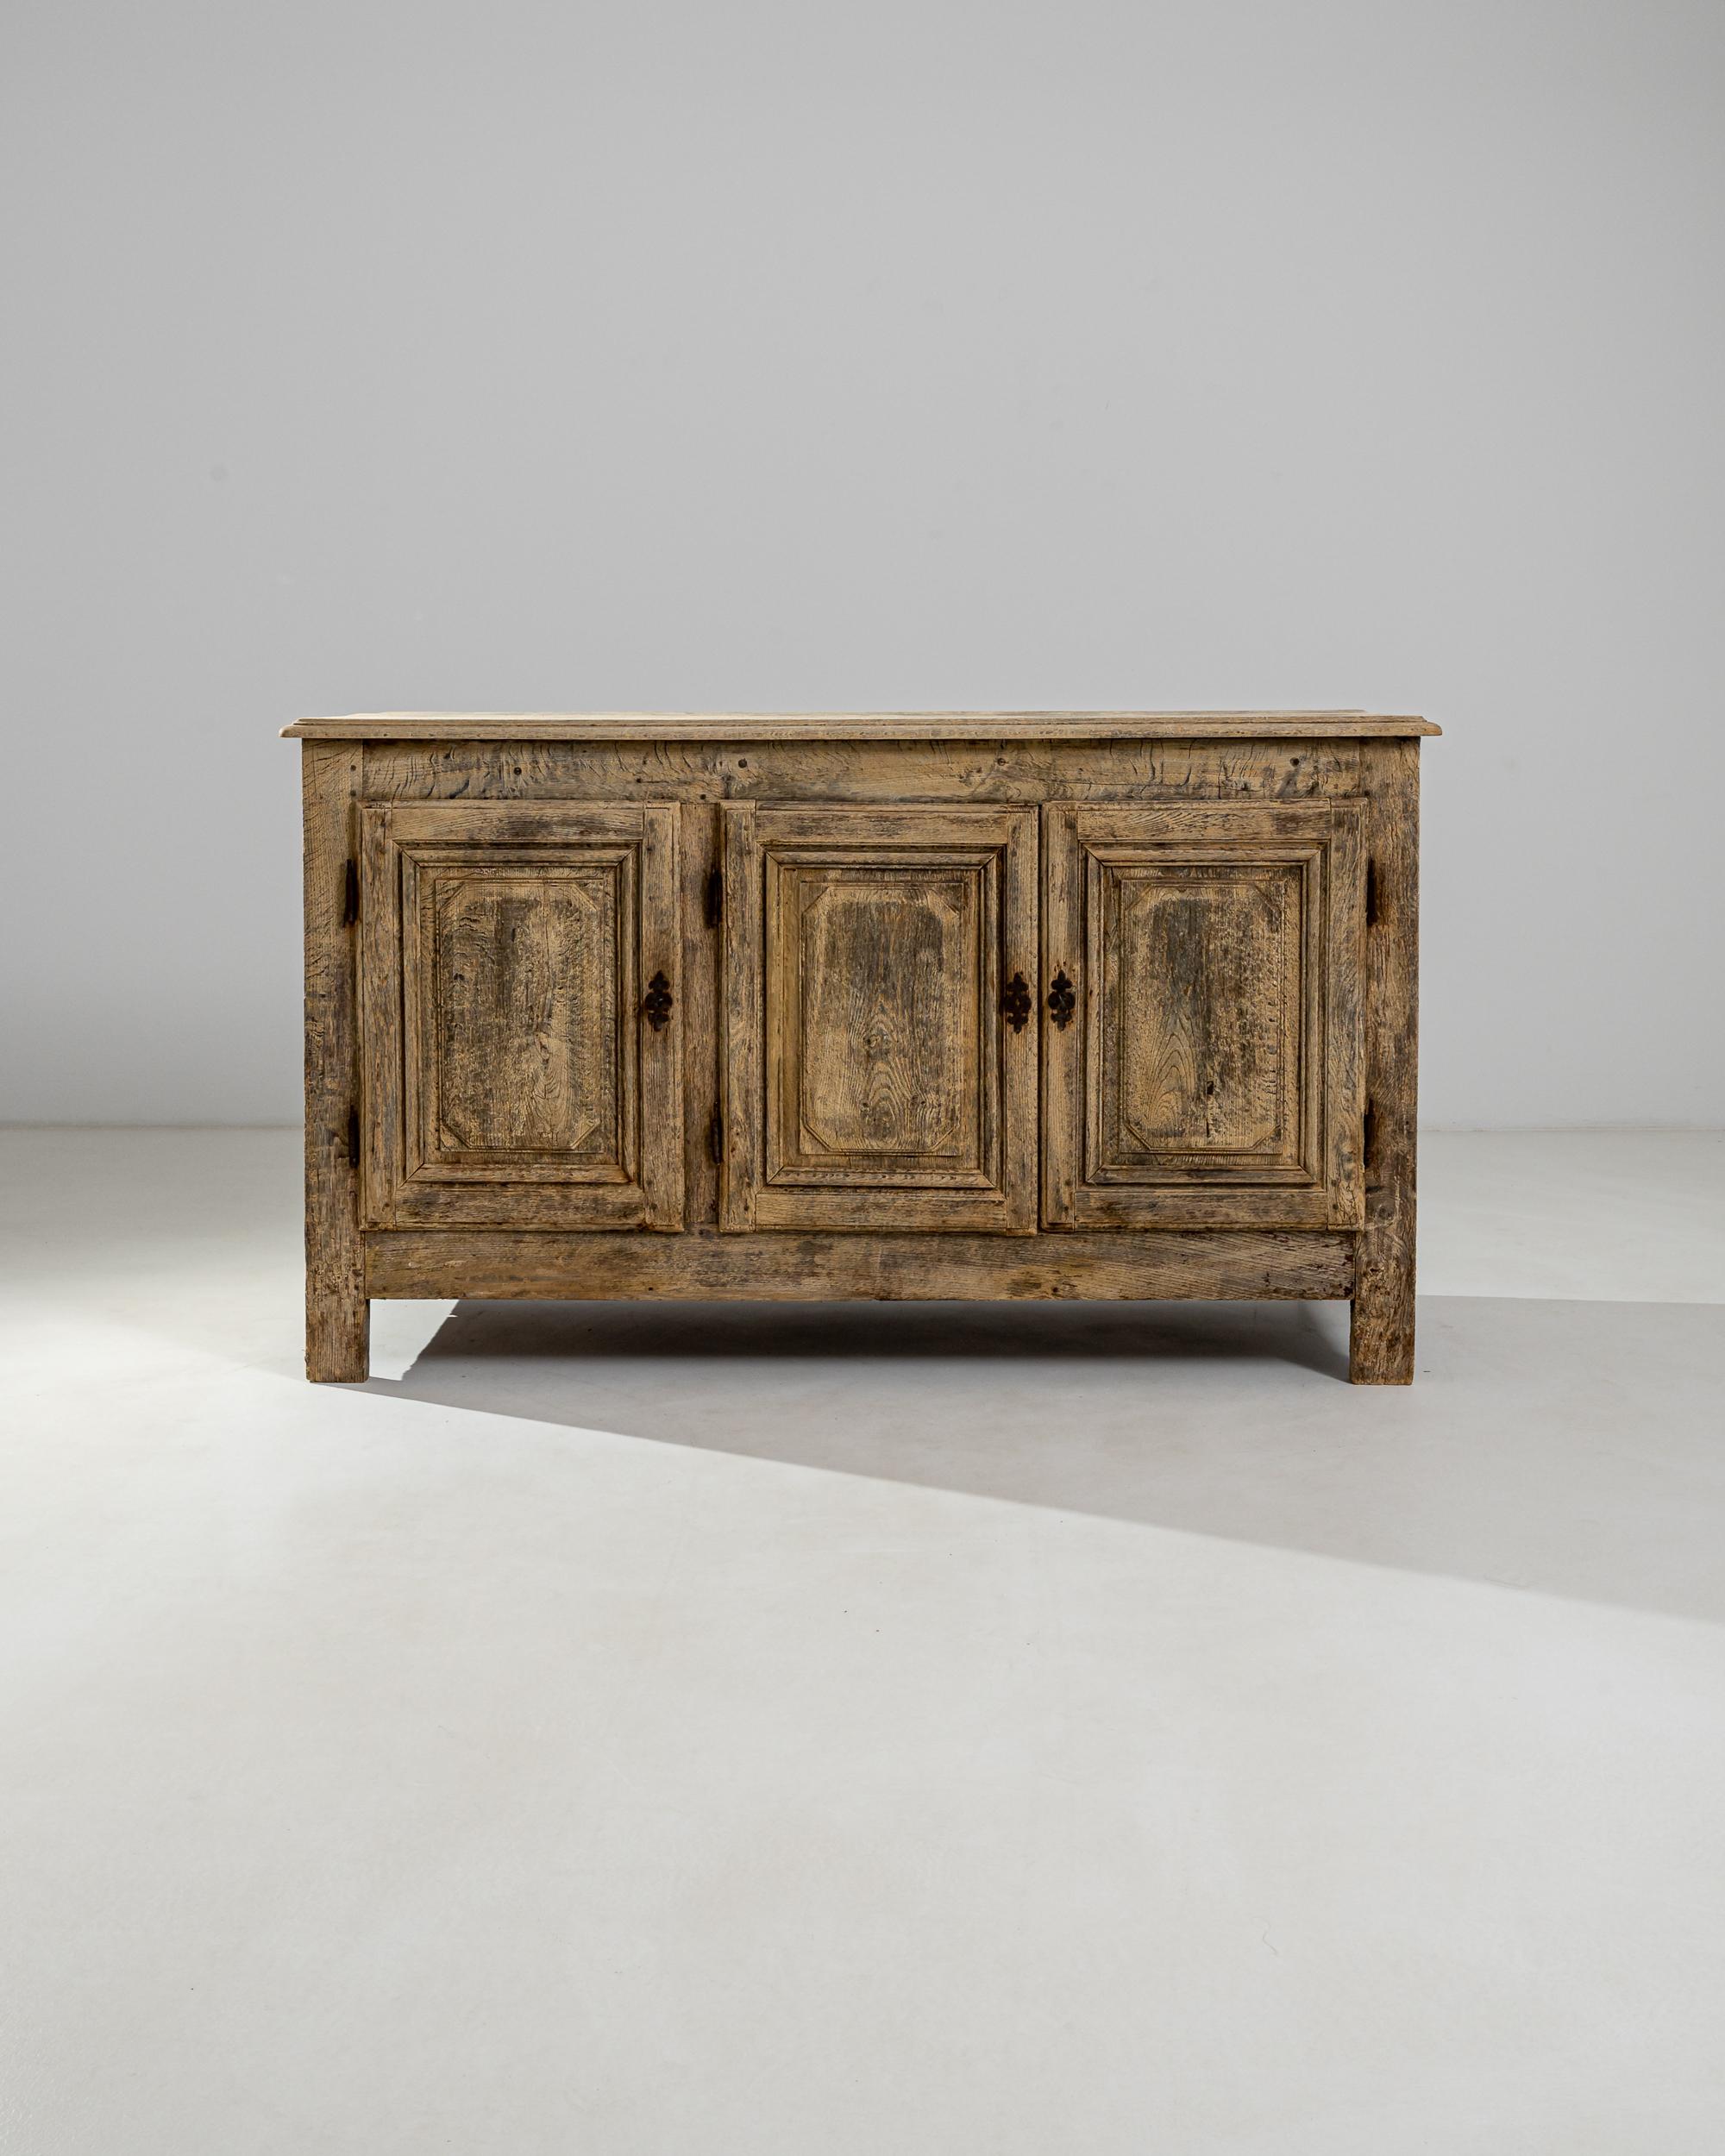 This handsome antique buffet in natural oak epitomizes the simplicity and sophistication of French Provincial style. Made in 19th century France, the shape is rustic and unaffected; subtle details such as the octagonal paneling on the cupboard doors